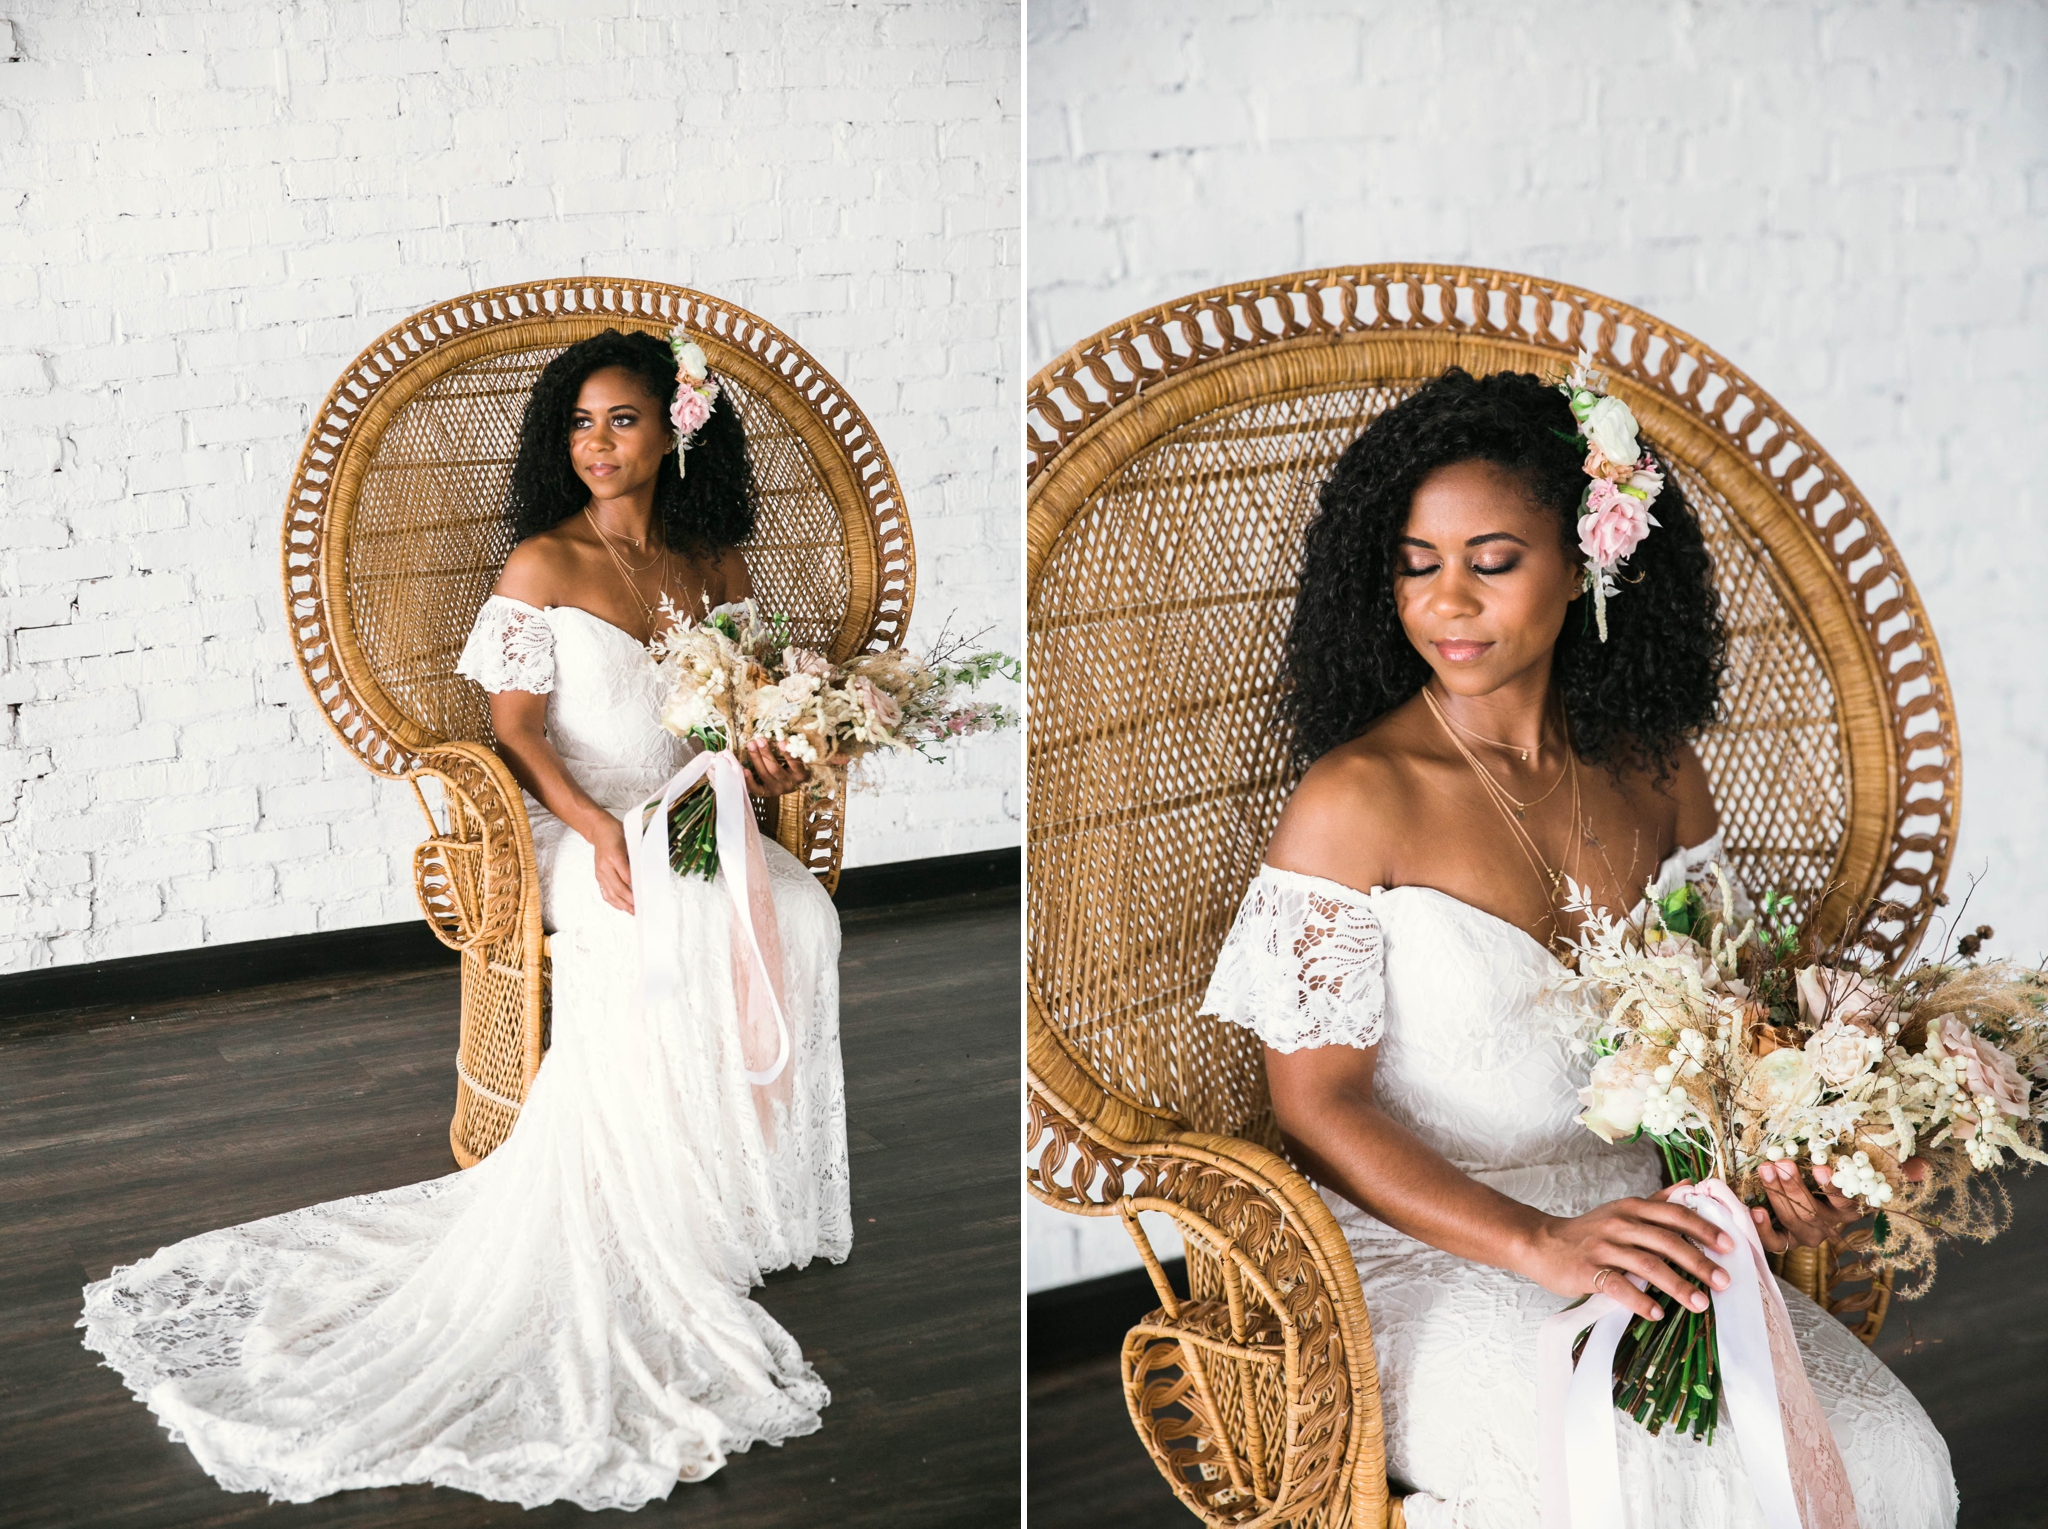  Indoor Wedding Portraits, shot with natural light - black love - african american bride with natural hair sitting in a Midcentury Woven Wicker Peacock Chair in a boho wedding dress with a big bouquet - tropical inspiration - honolulu, oahu, hawaii p